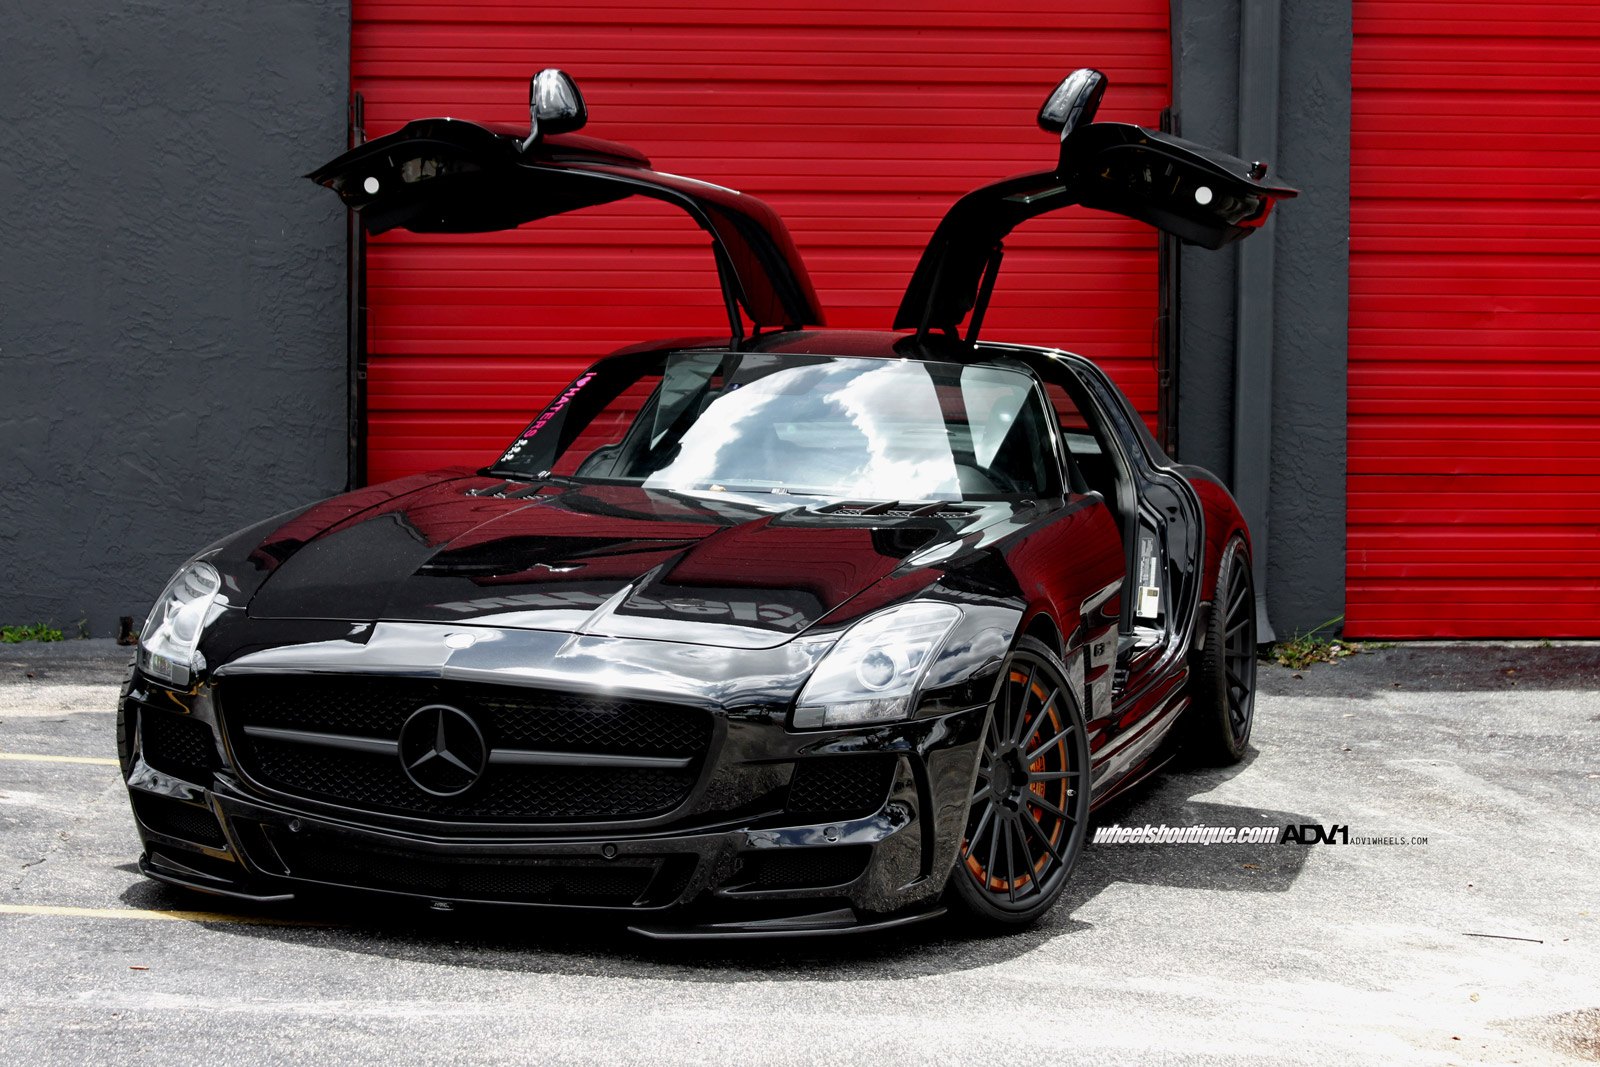 Custom Blacked Out Mercedes SLS with Vertical Doors - Photo by ADV.1